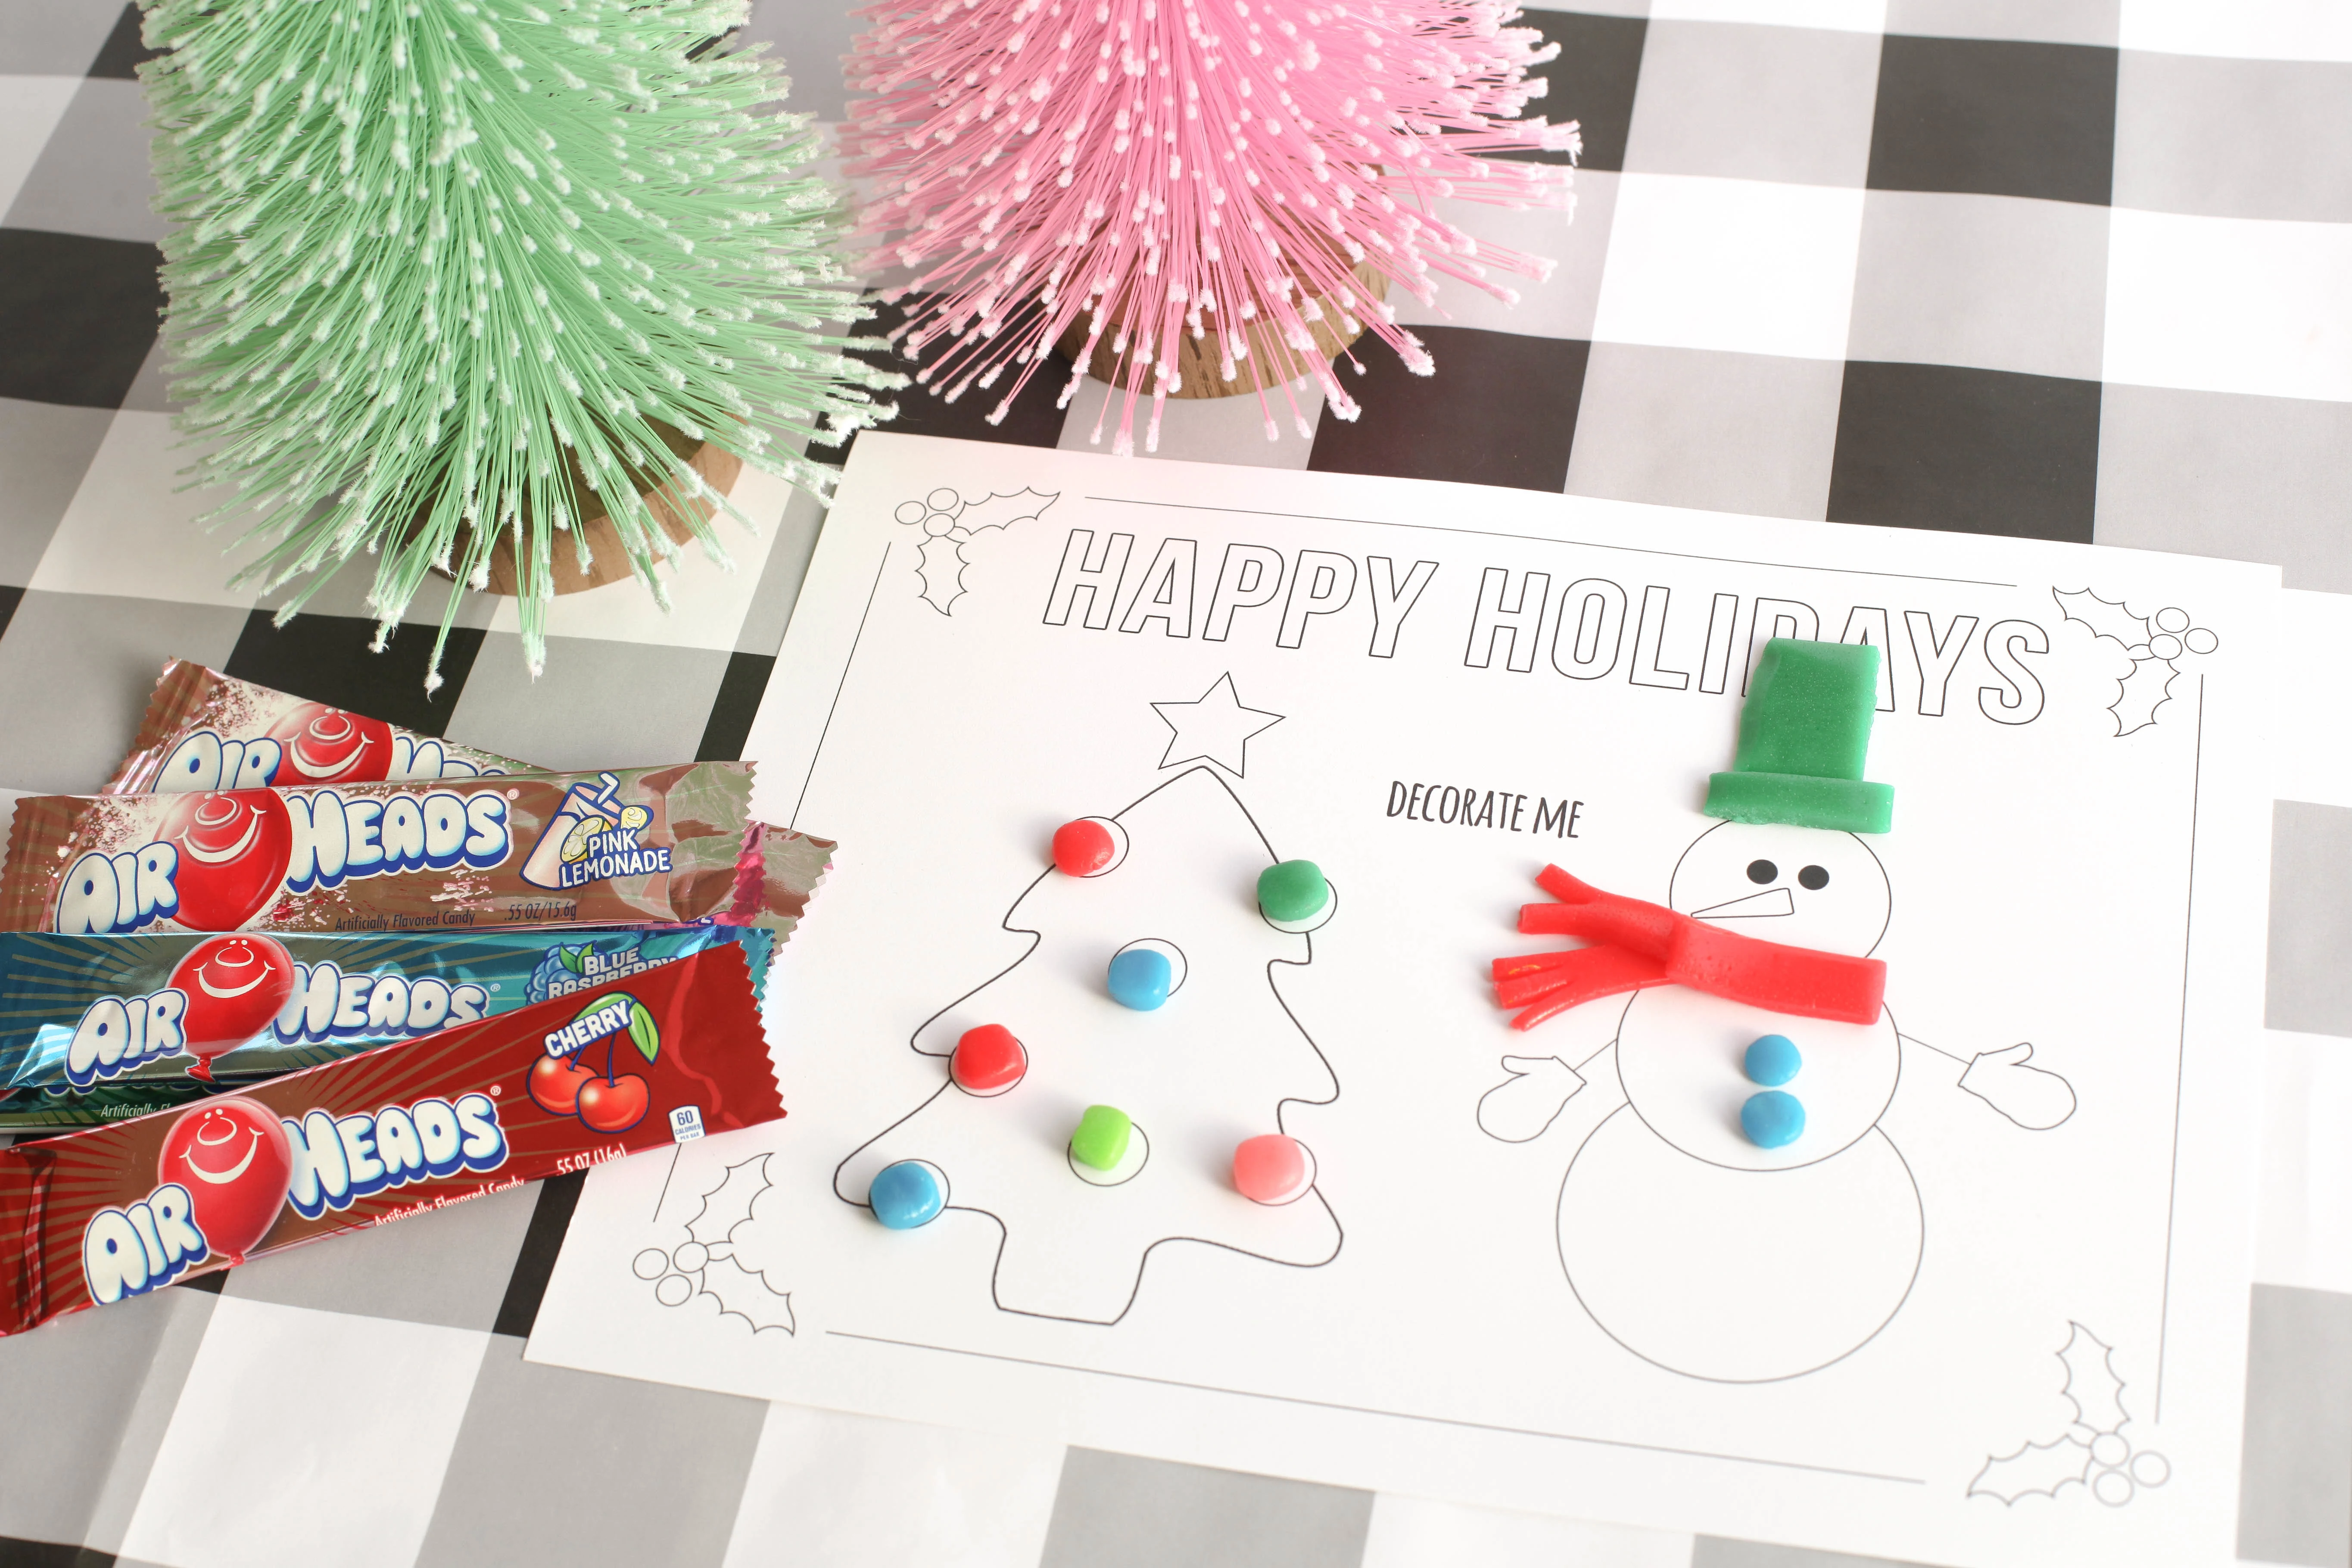 Printable Holiday Placemat for Decorating with Airheads